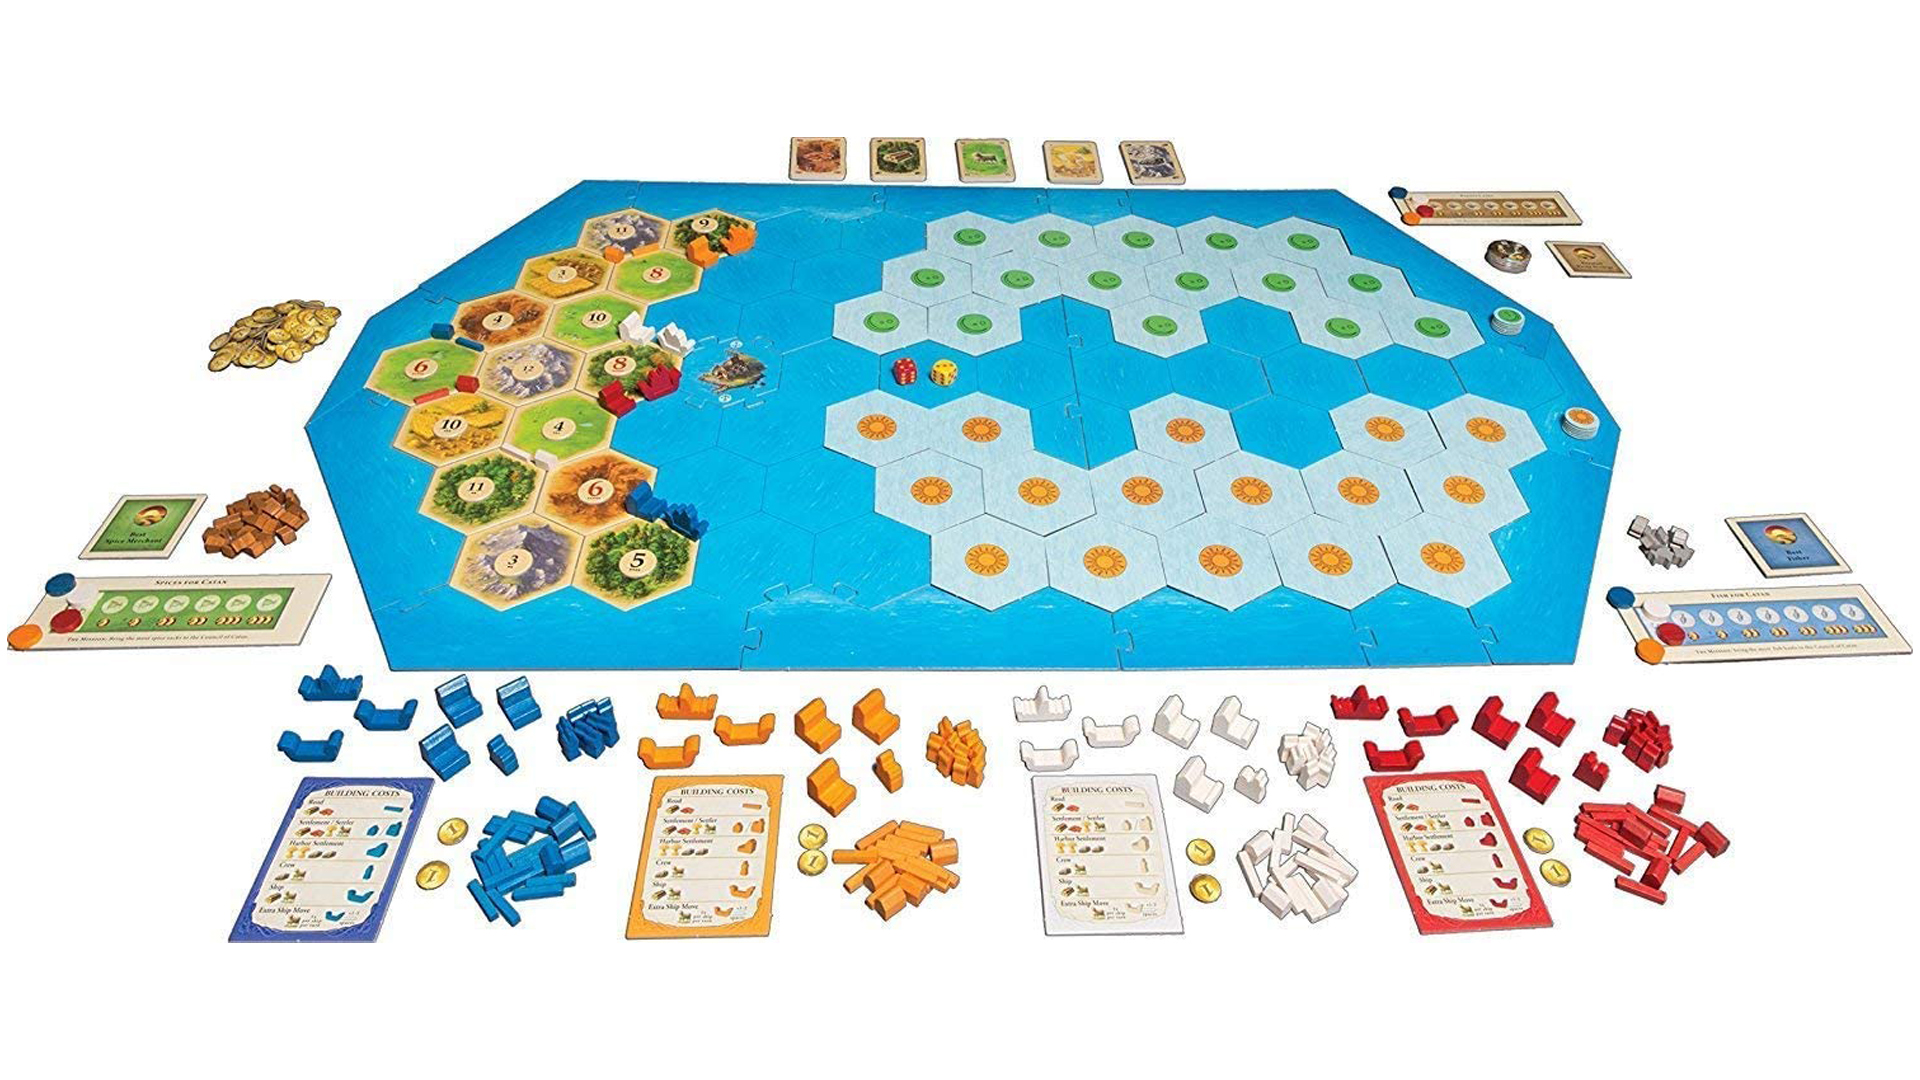 catan 5 6 player expansion